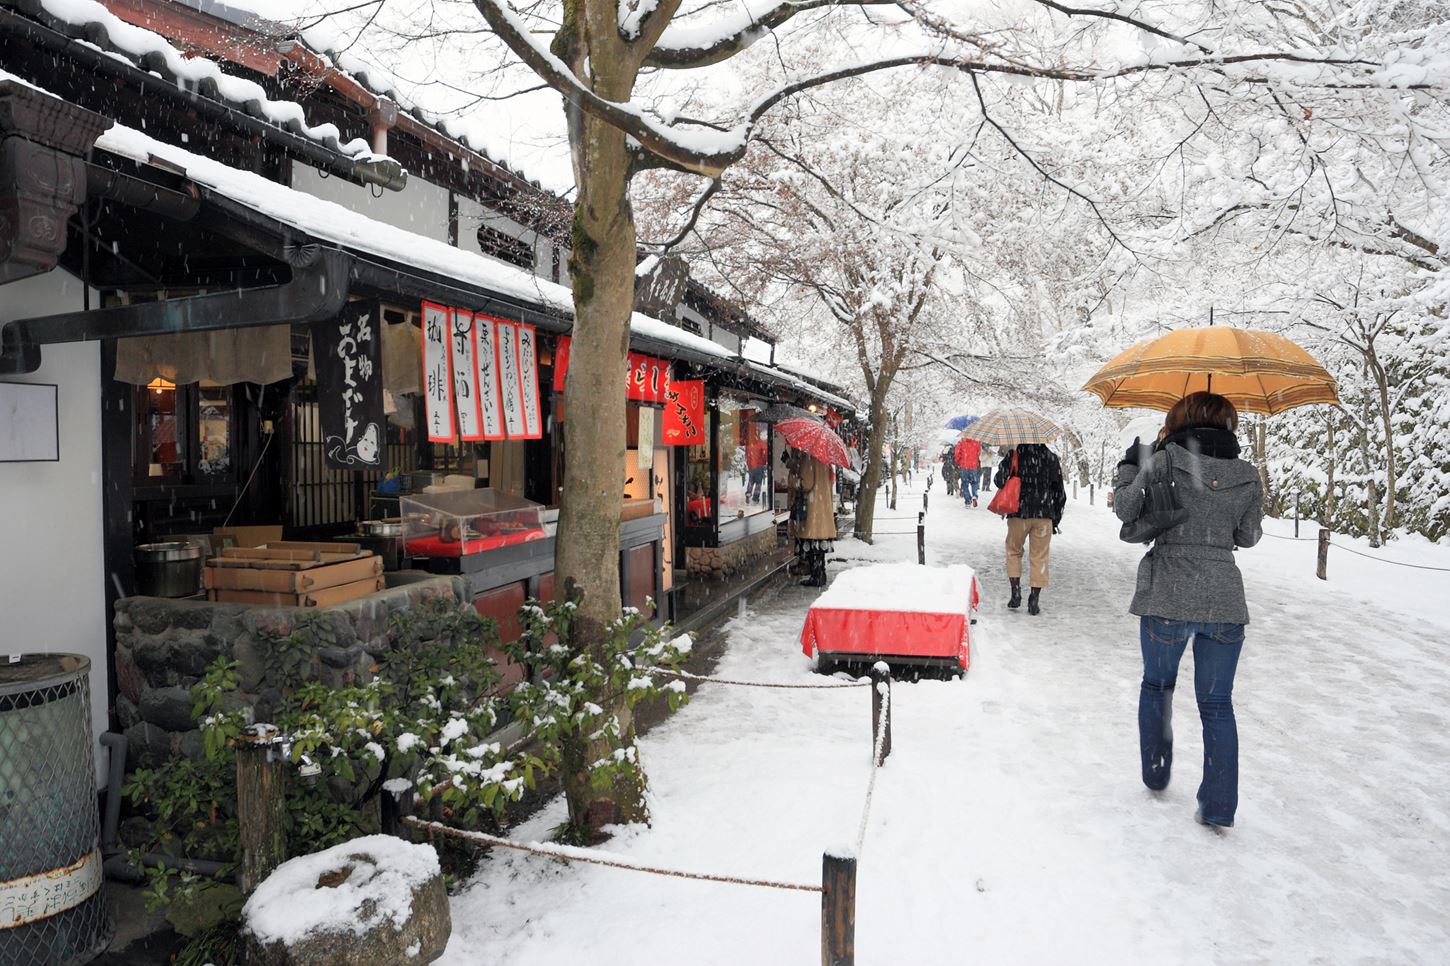 Sightseeing scenery that simply shows the weather in Kyoto in February3